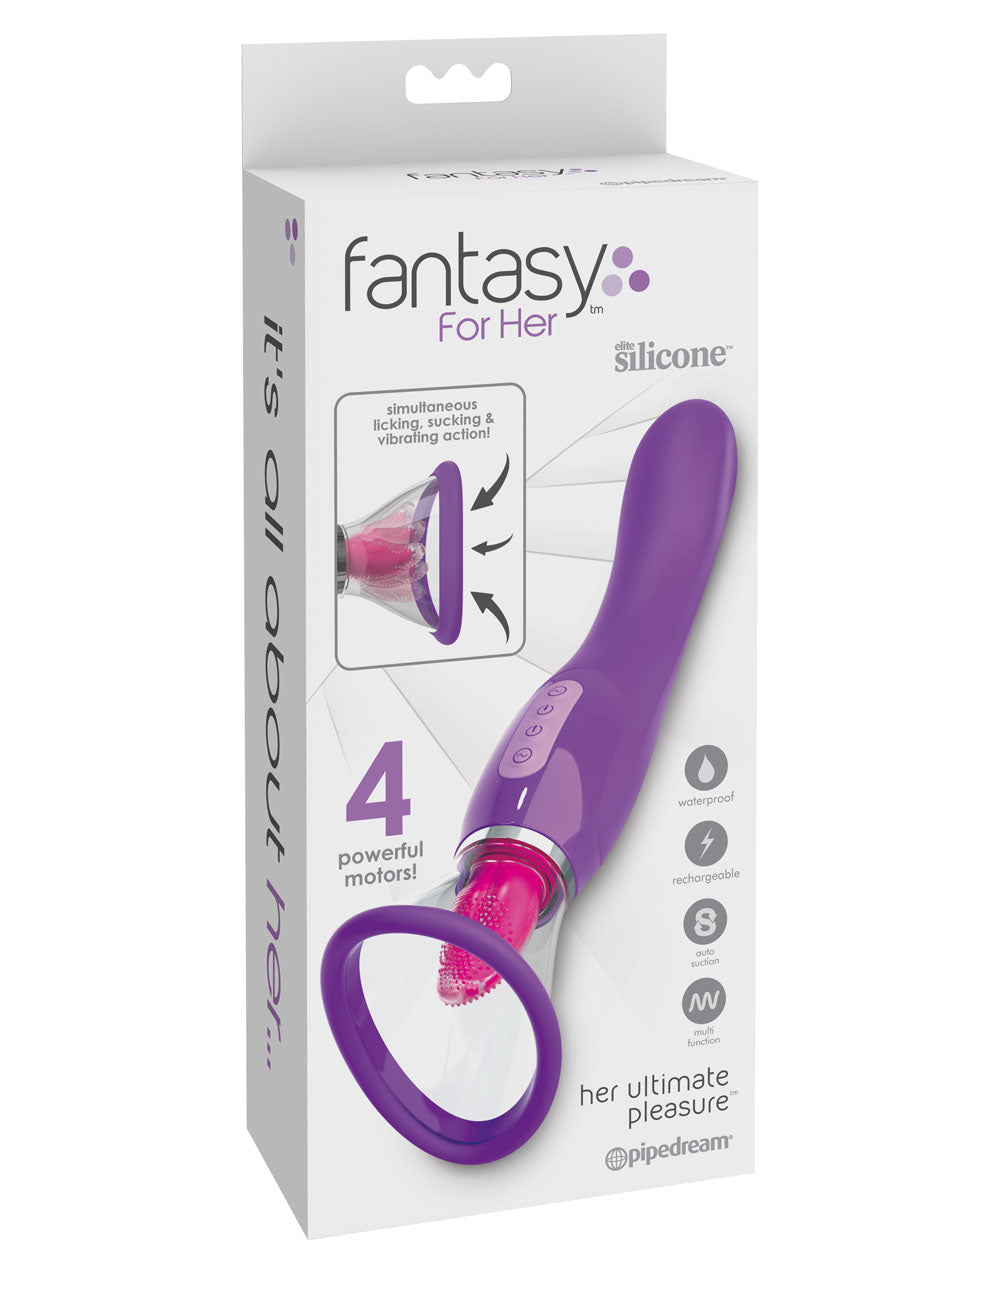 Fantasy for Her - Her Ultimate Pleasure